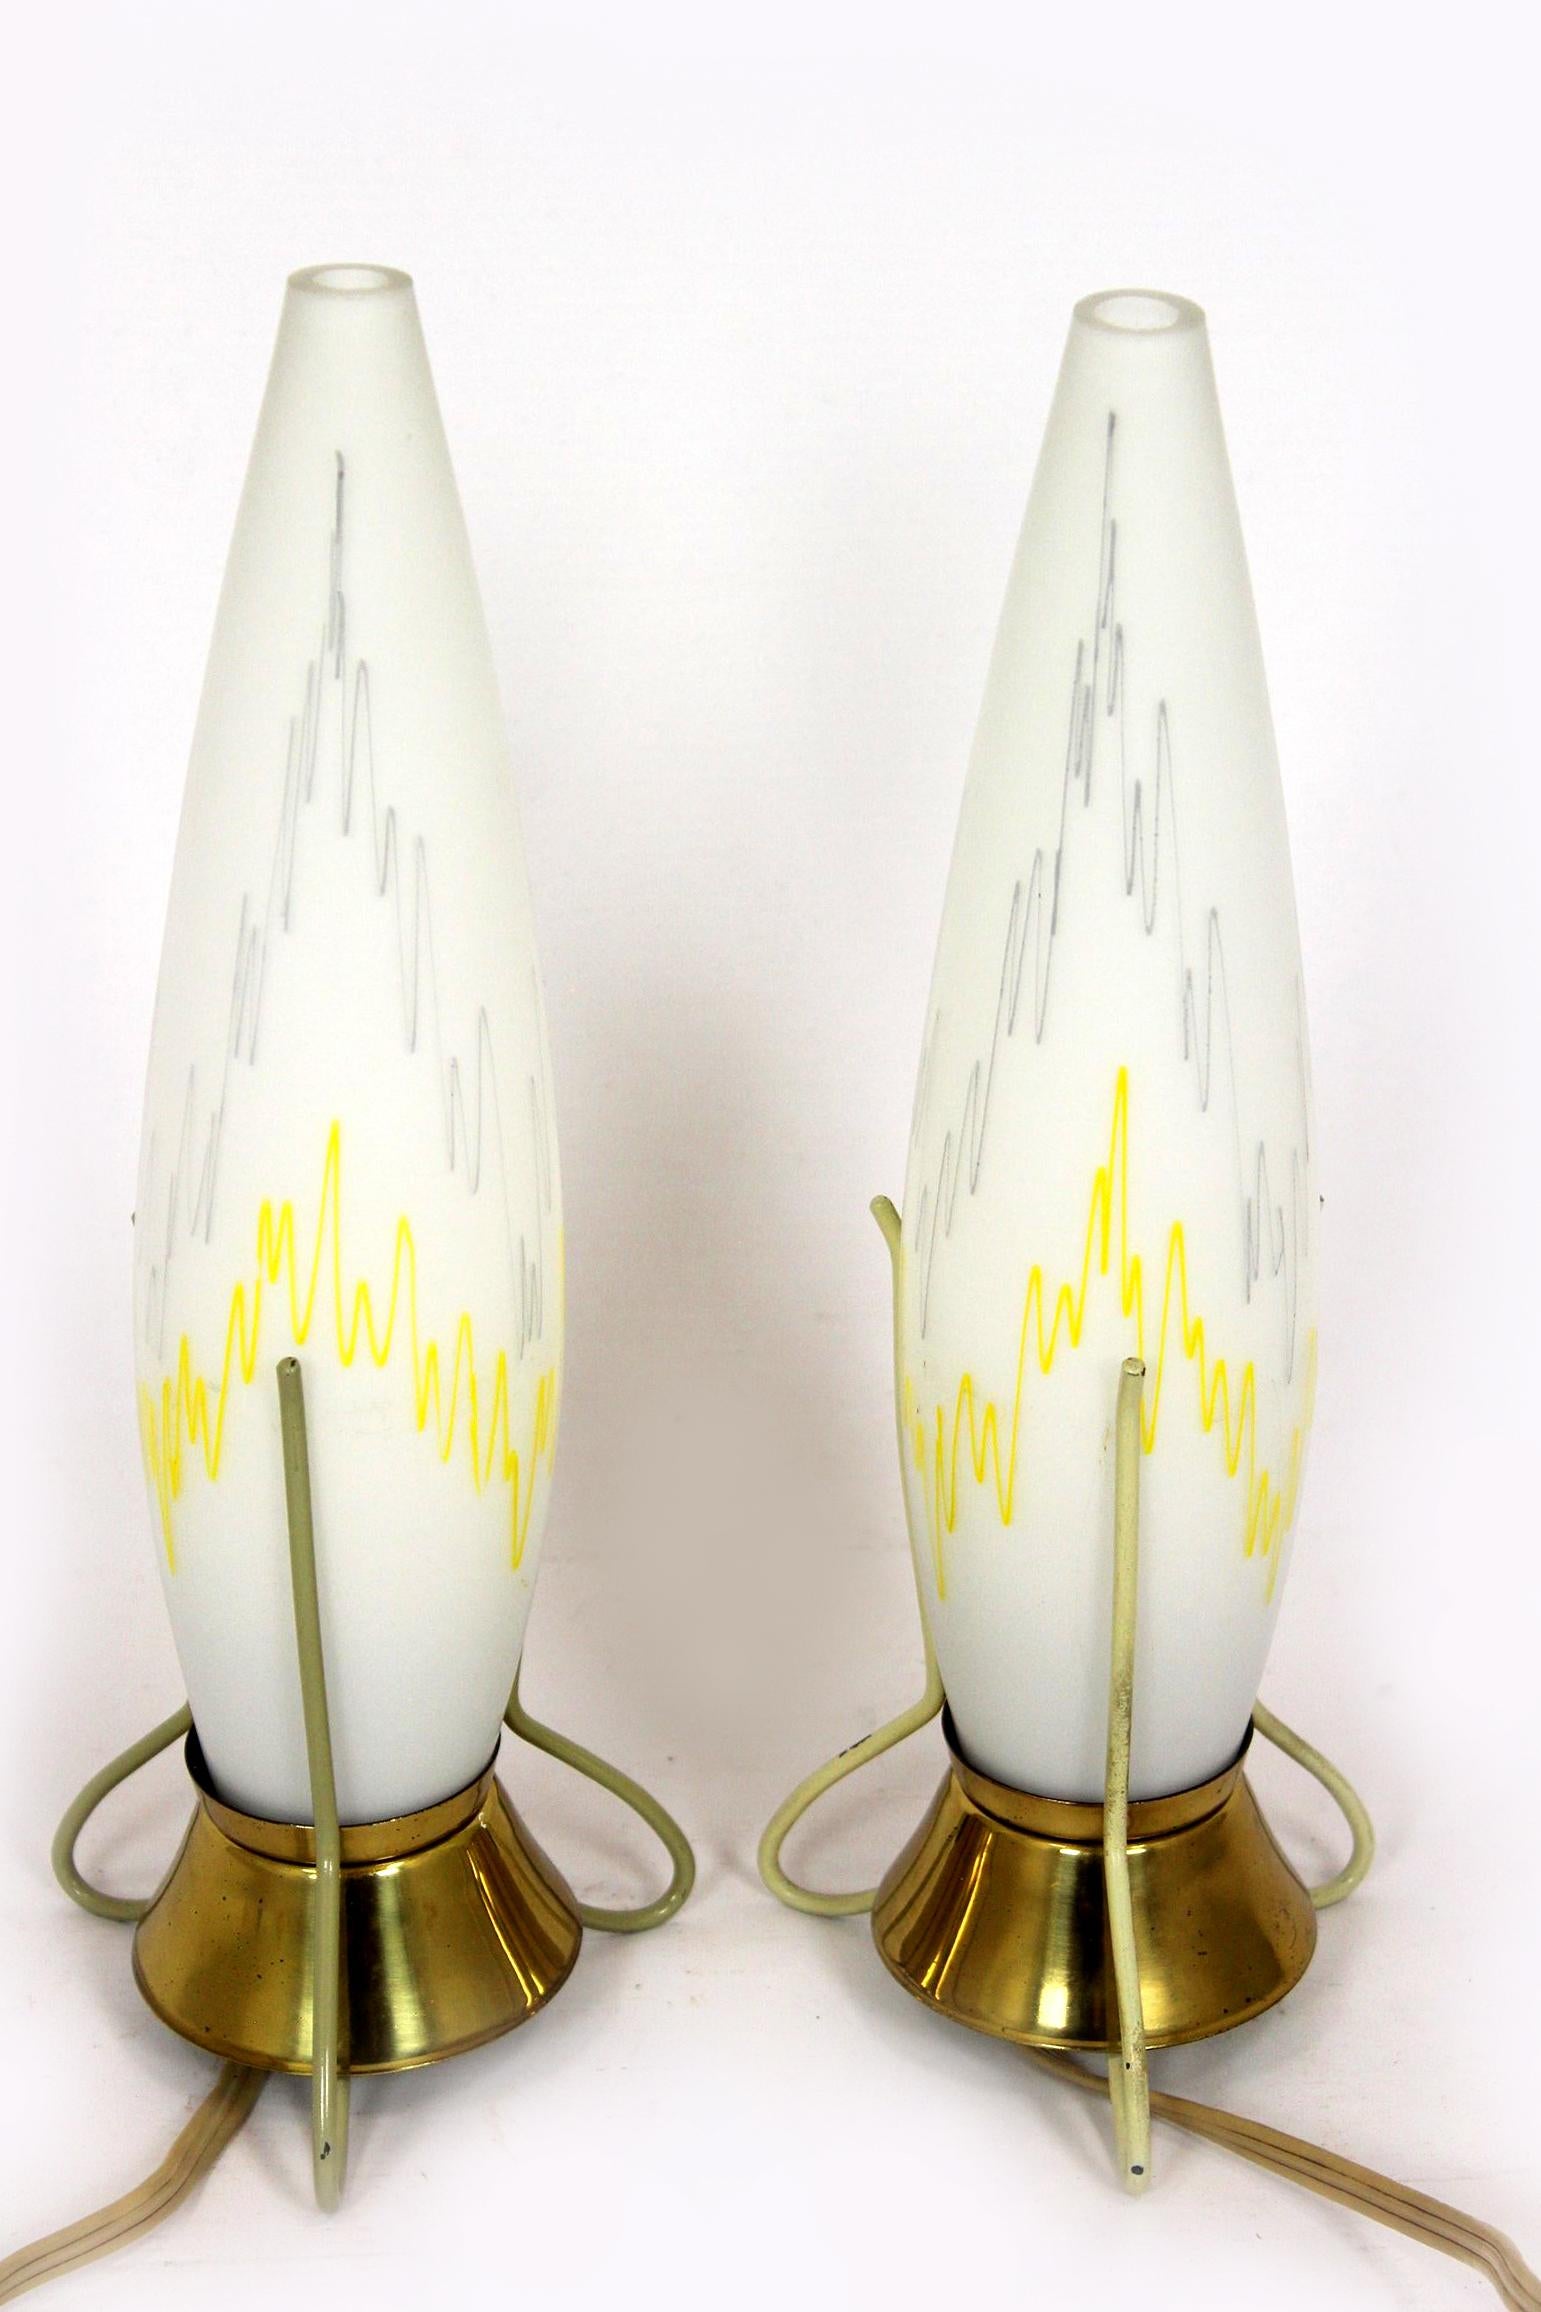 20th Century Space Age Rocket Table Lamps by Zukov, 1960s, Set of 2 For Sale